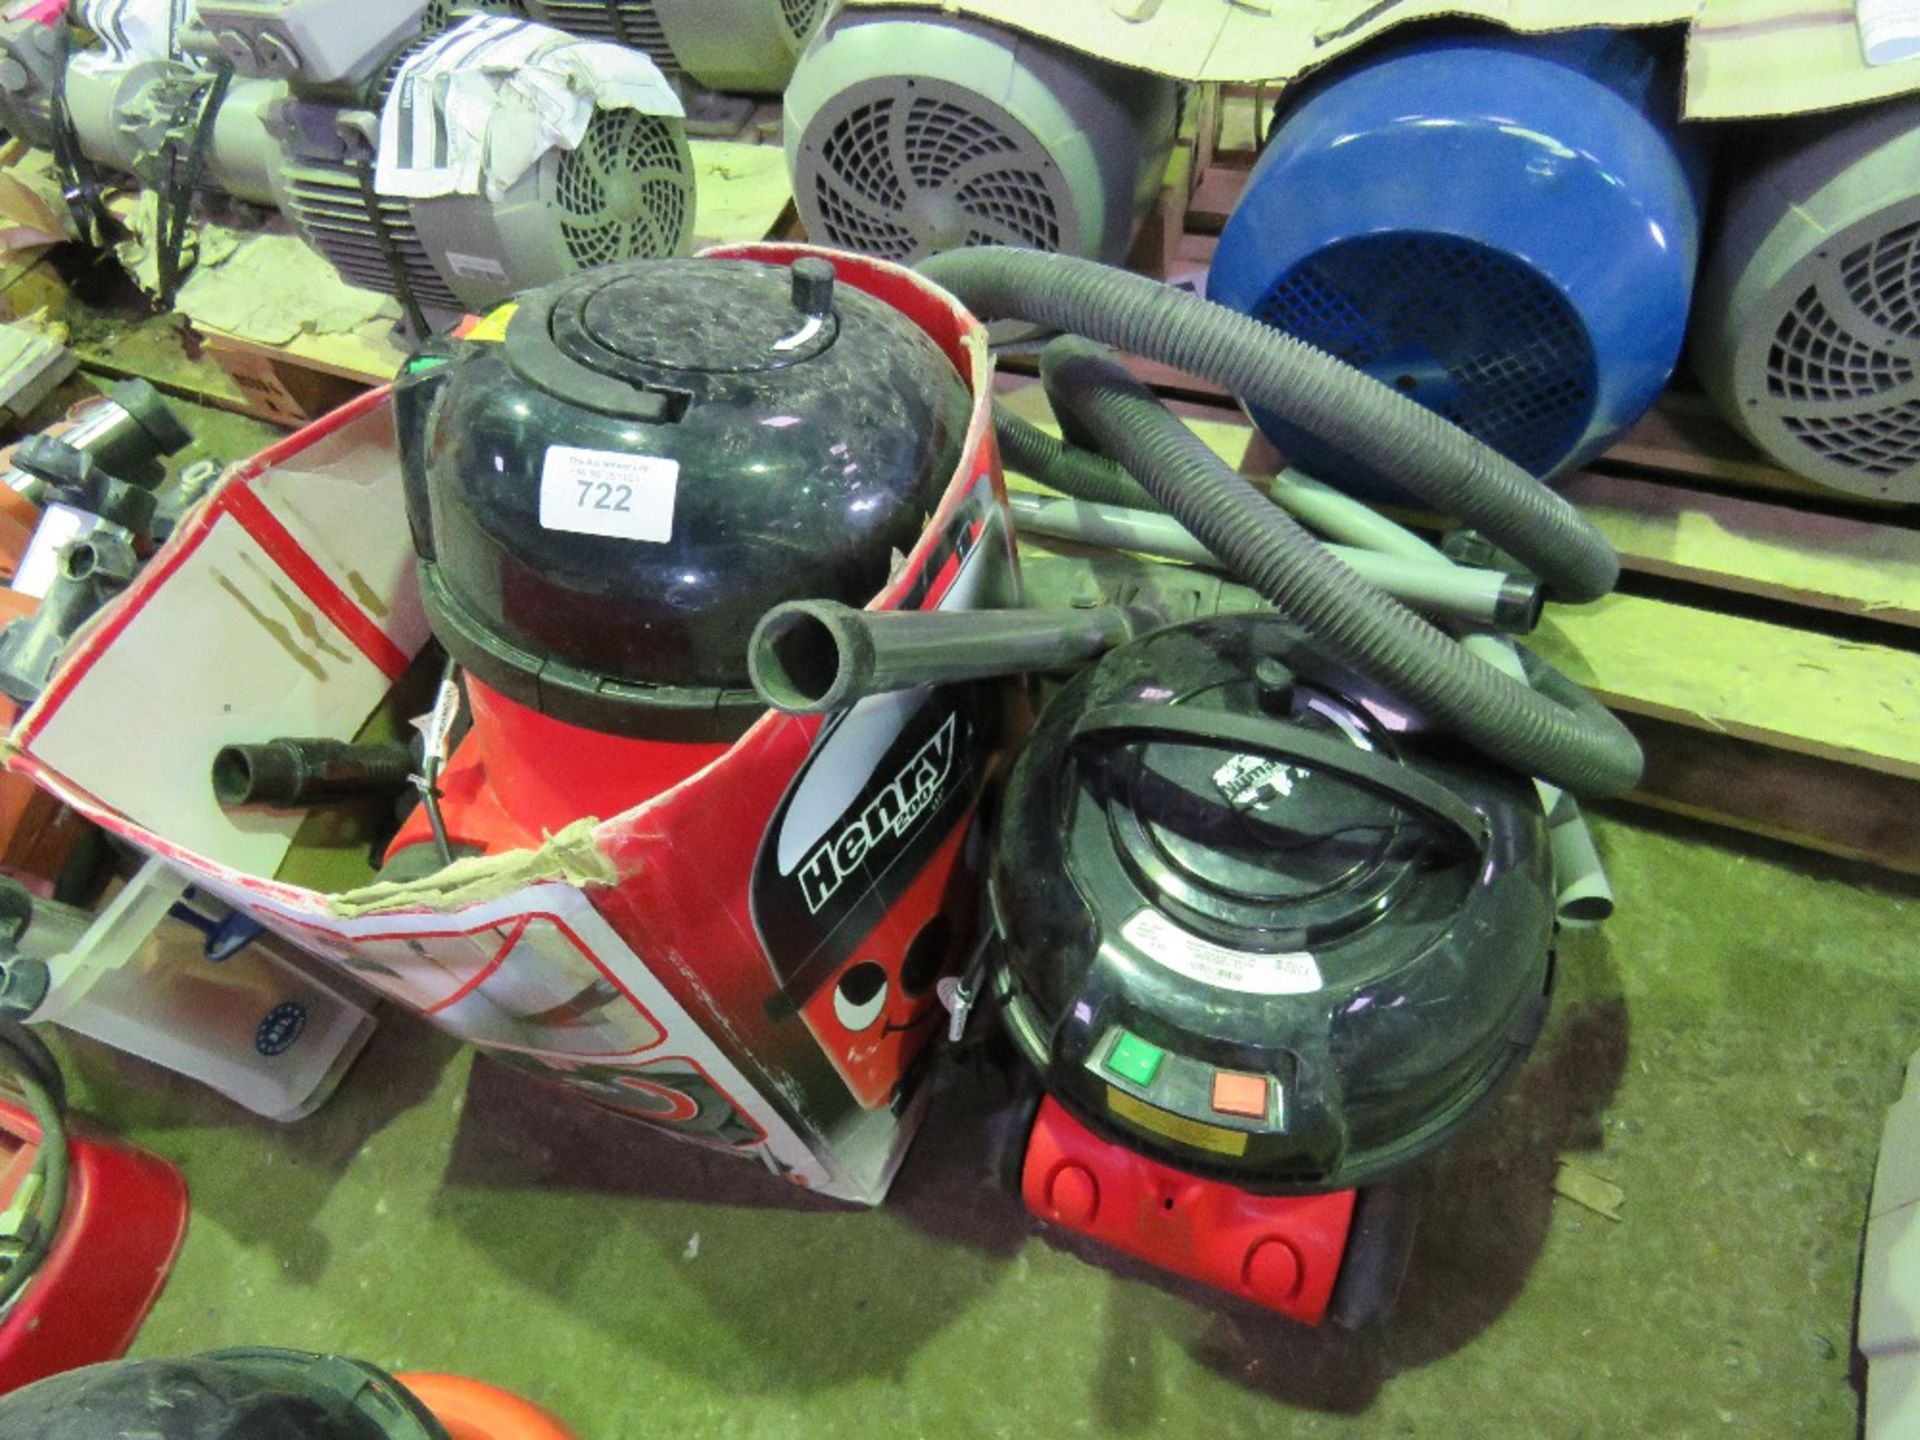 2 X HENRY VACUUM CLEANERS. SOURCED FROM DEPOT CLEARANCE DUE TO A CHANGE IN COMPANY POLICY.